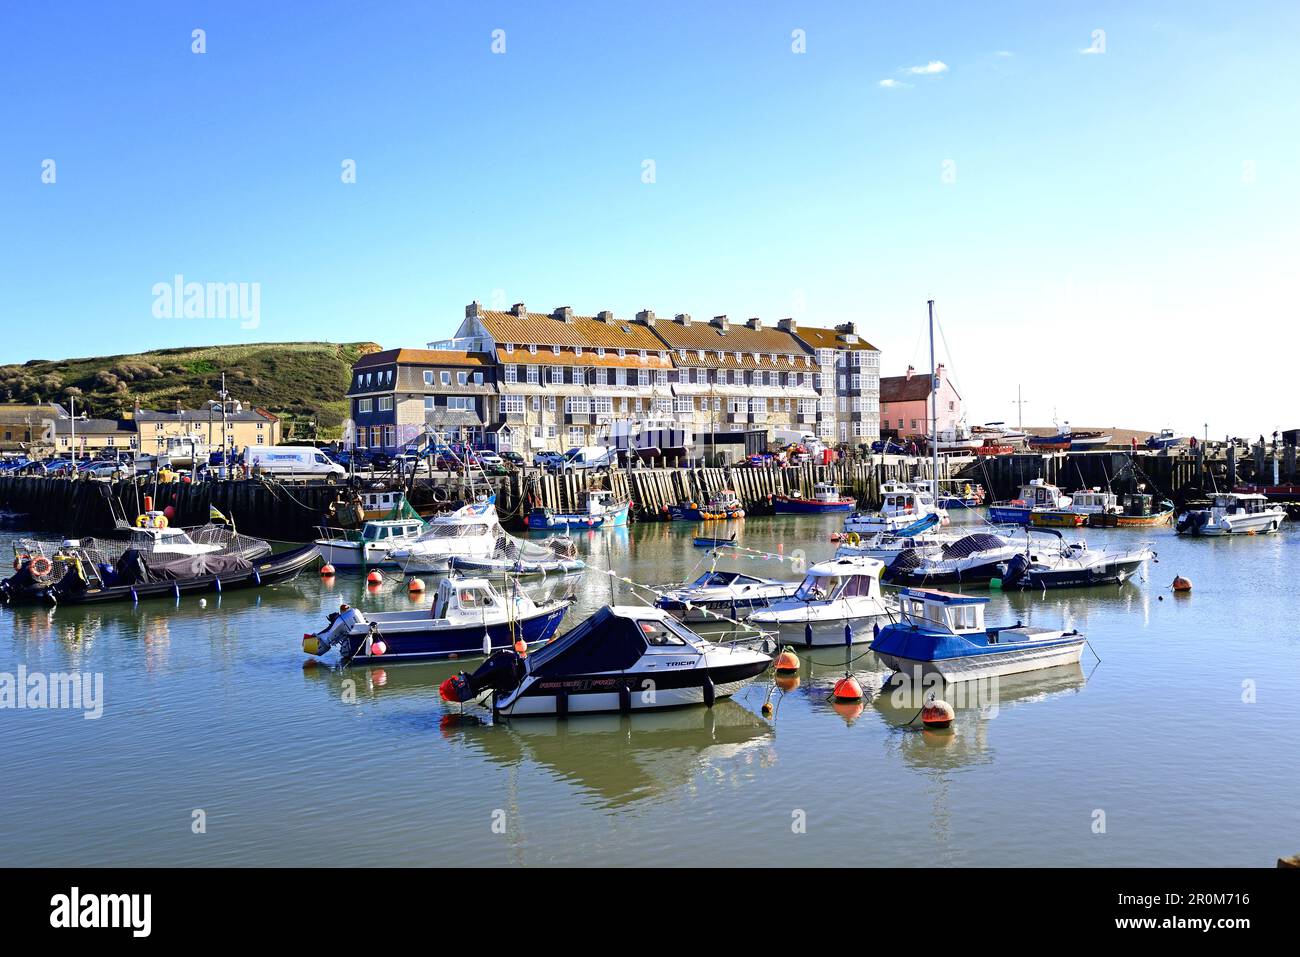 Fishing boats moored in the harbour with apartments to the rear, West Bay, Dorset, UK, Europe. Stock Photo